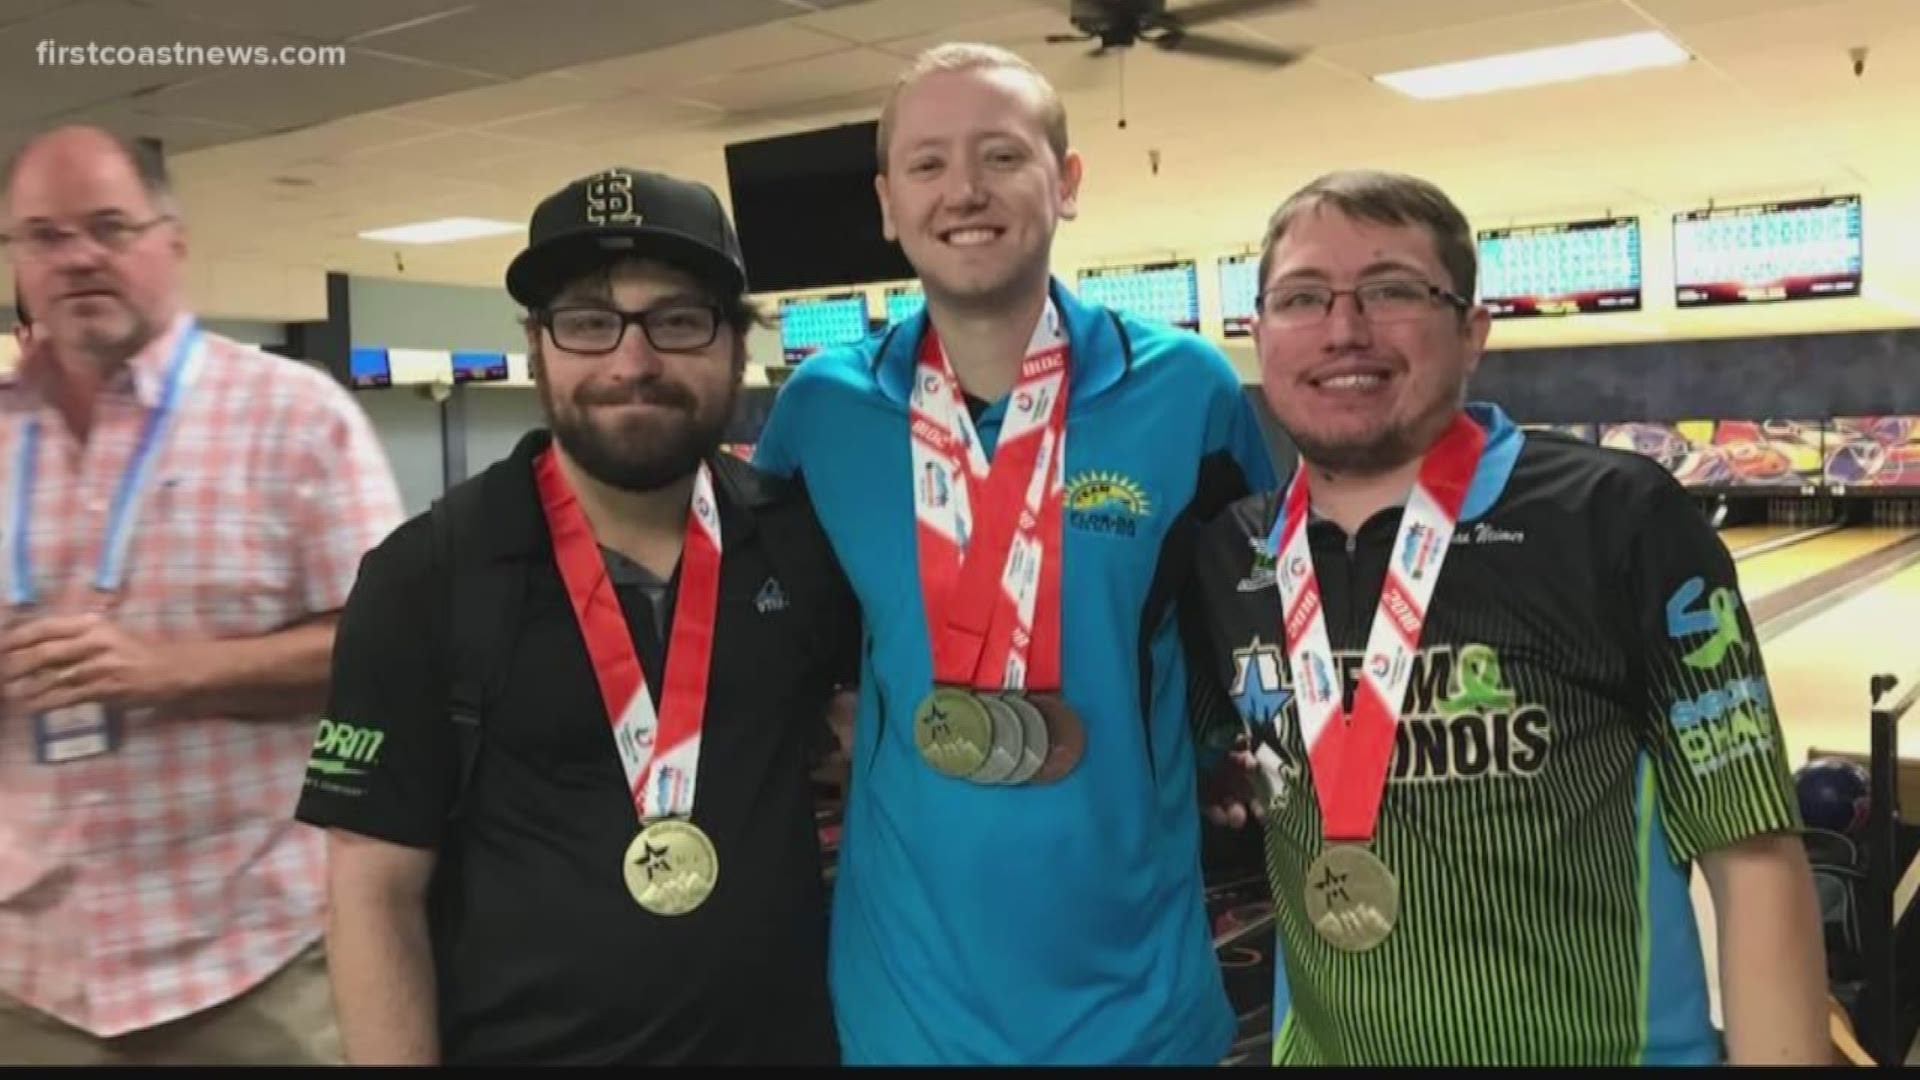 A Jacksonville man recently competed in the World Transplant games in England and came home with a Gold and two Bronze medals.